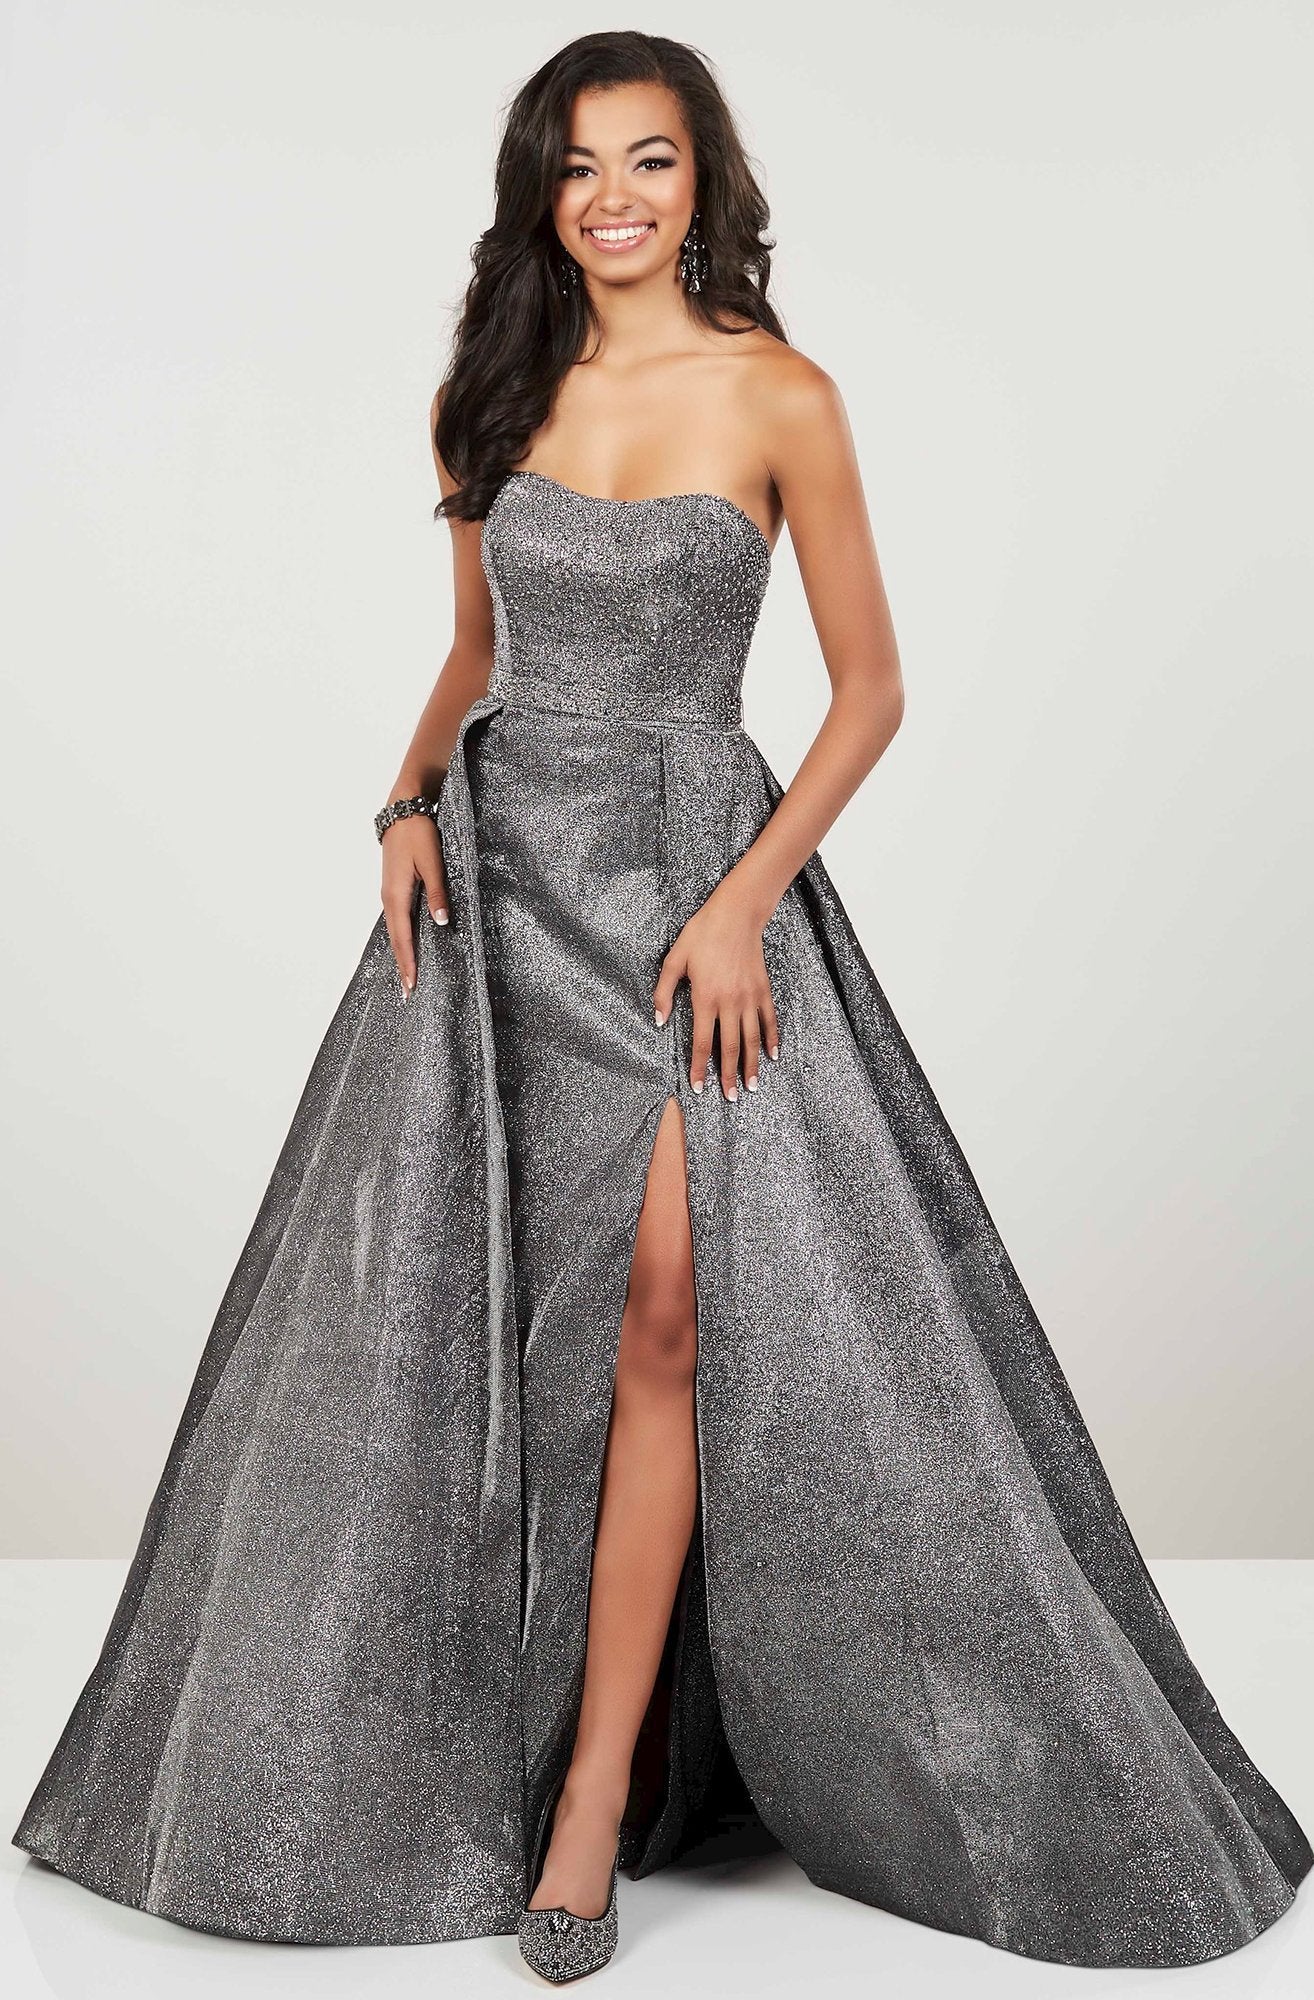 Panoply - 14943SC Strapless Jeweled Metallic Overskirt Gown